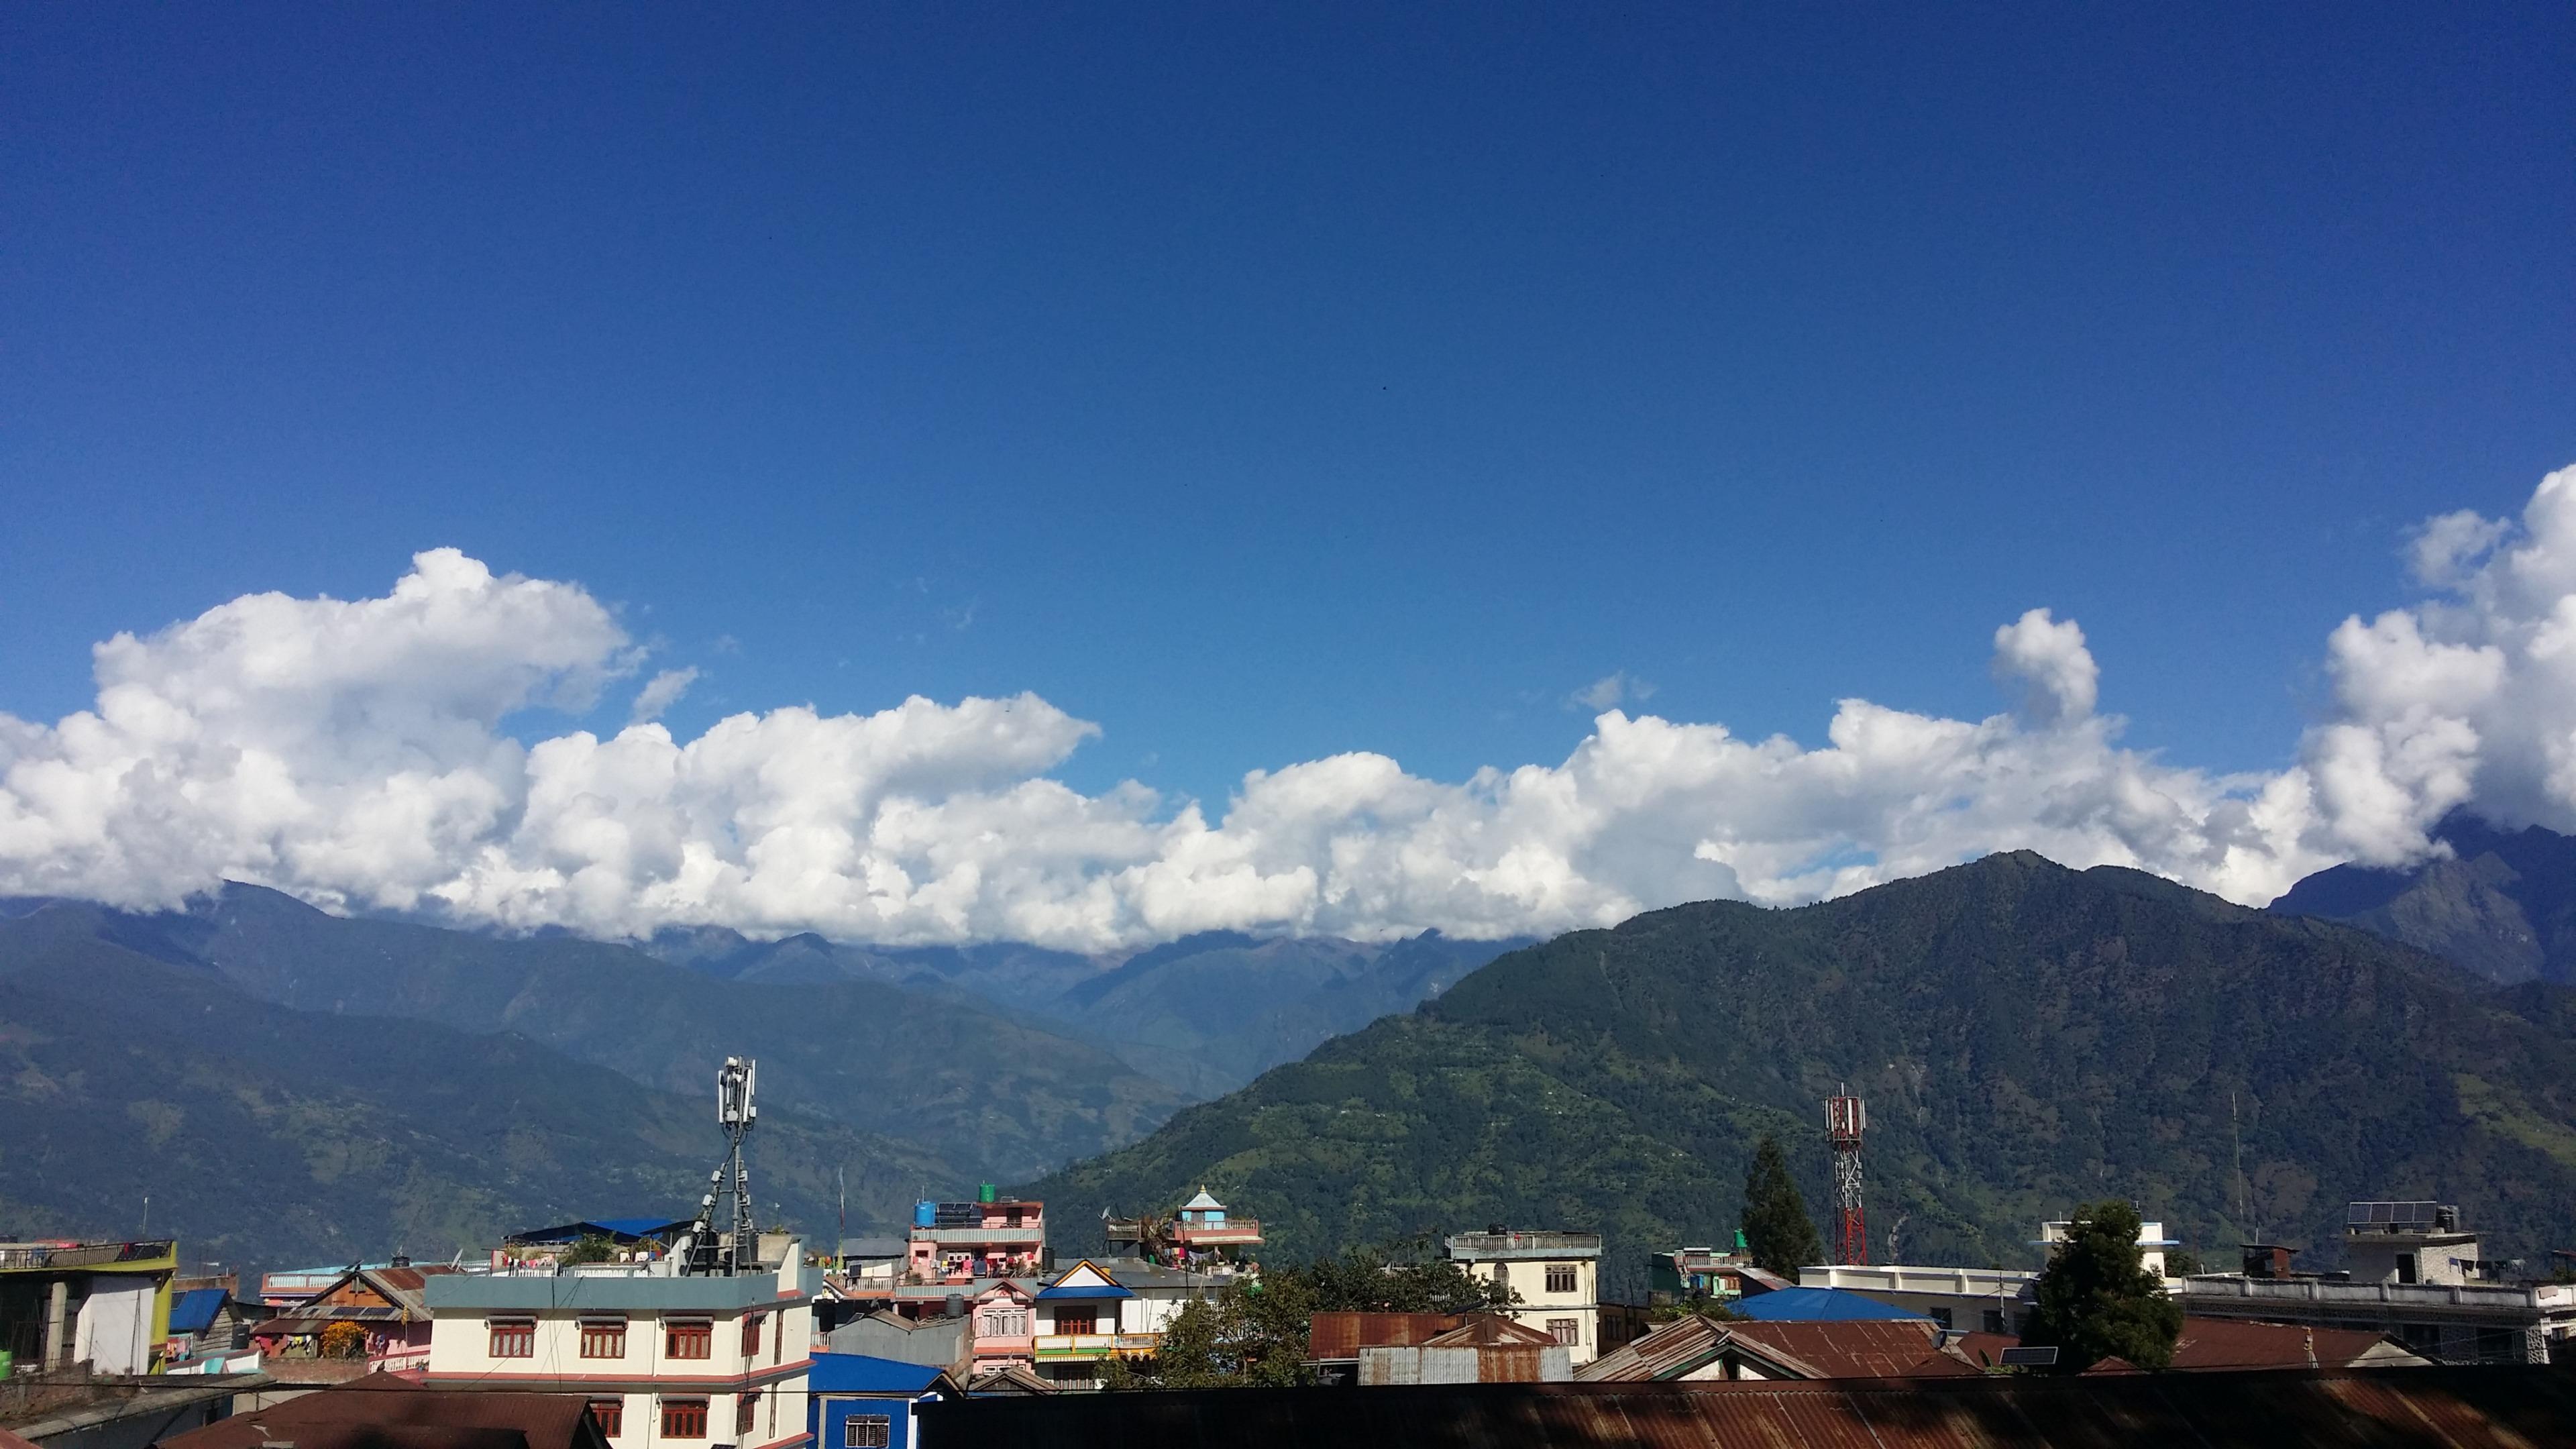 Small Town Taplejung Nepal - backiee